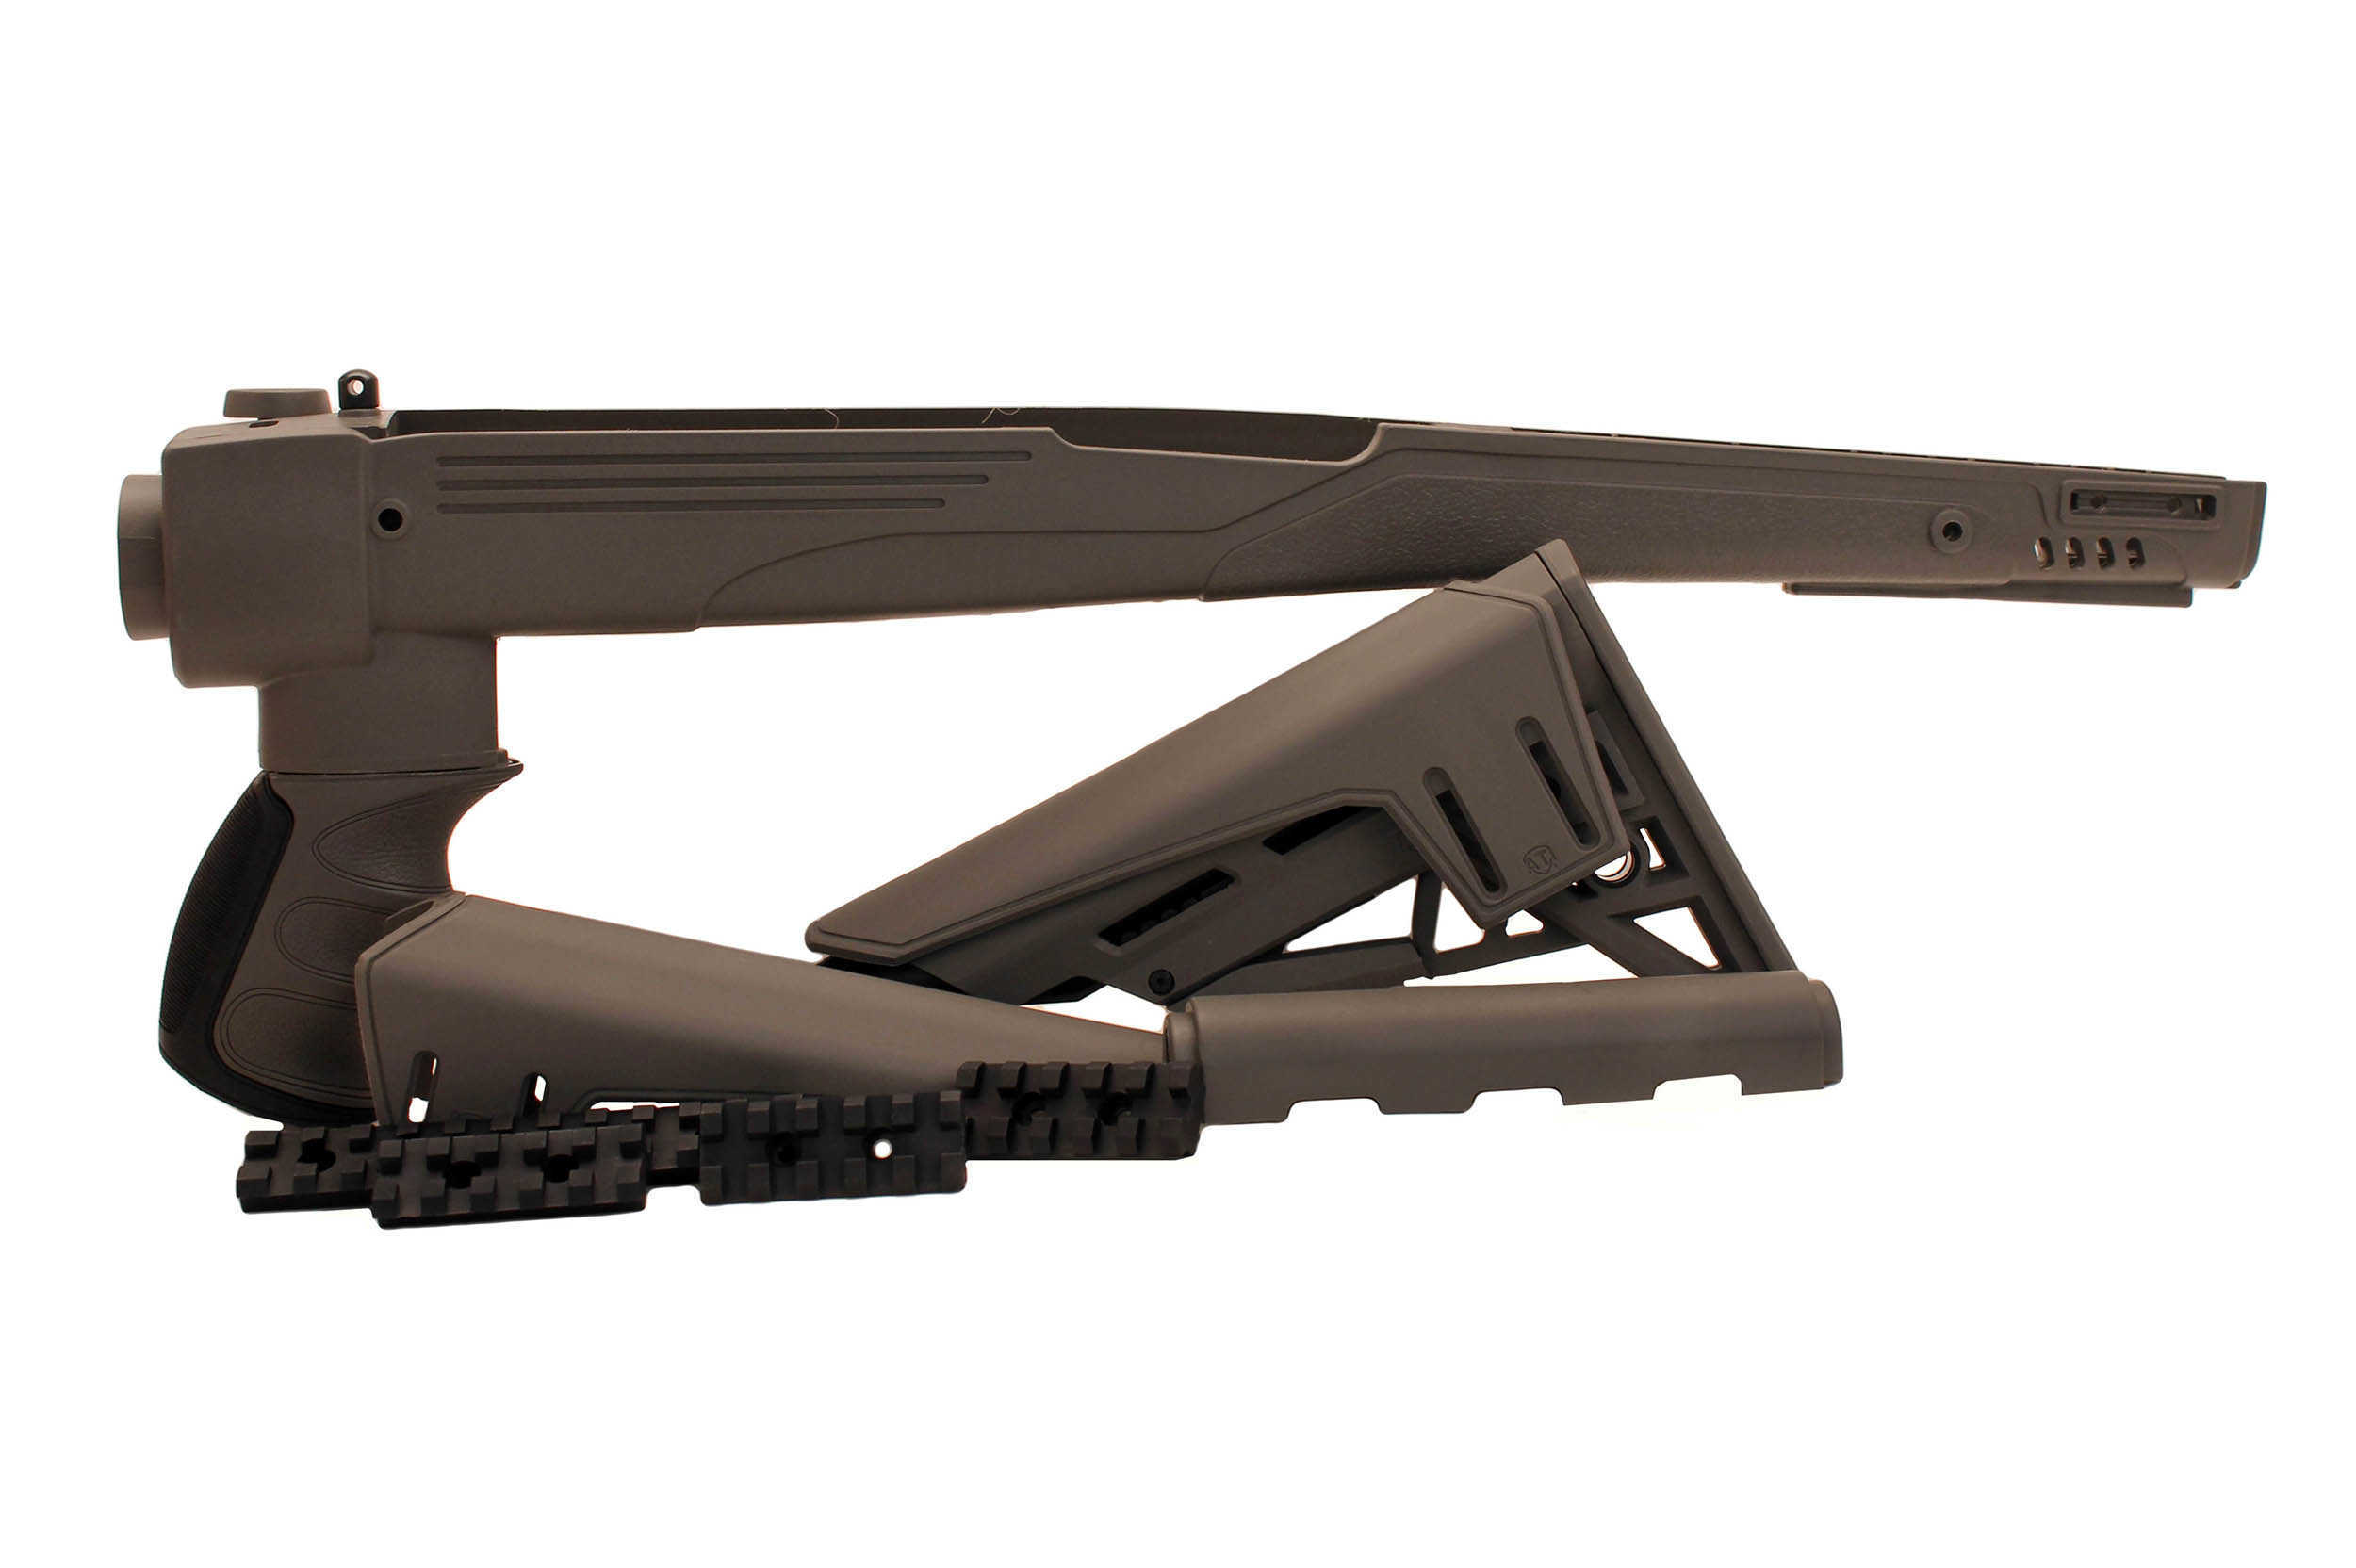 Advanced Technology Intl. ATI SKS Tactlite Adjustable 6 Position Side Folding Stock With Scorpion Recoil System Destroyer Gre B.2.40.1232